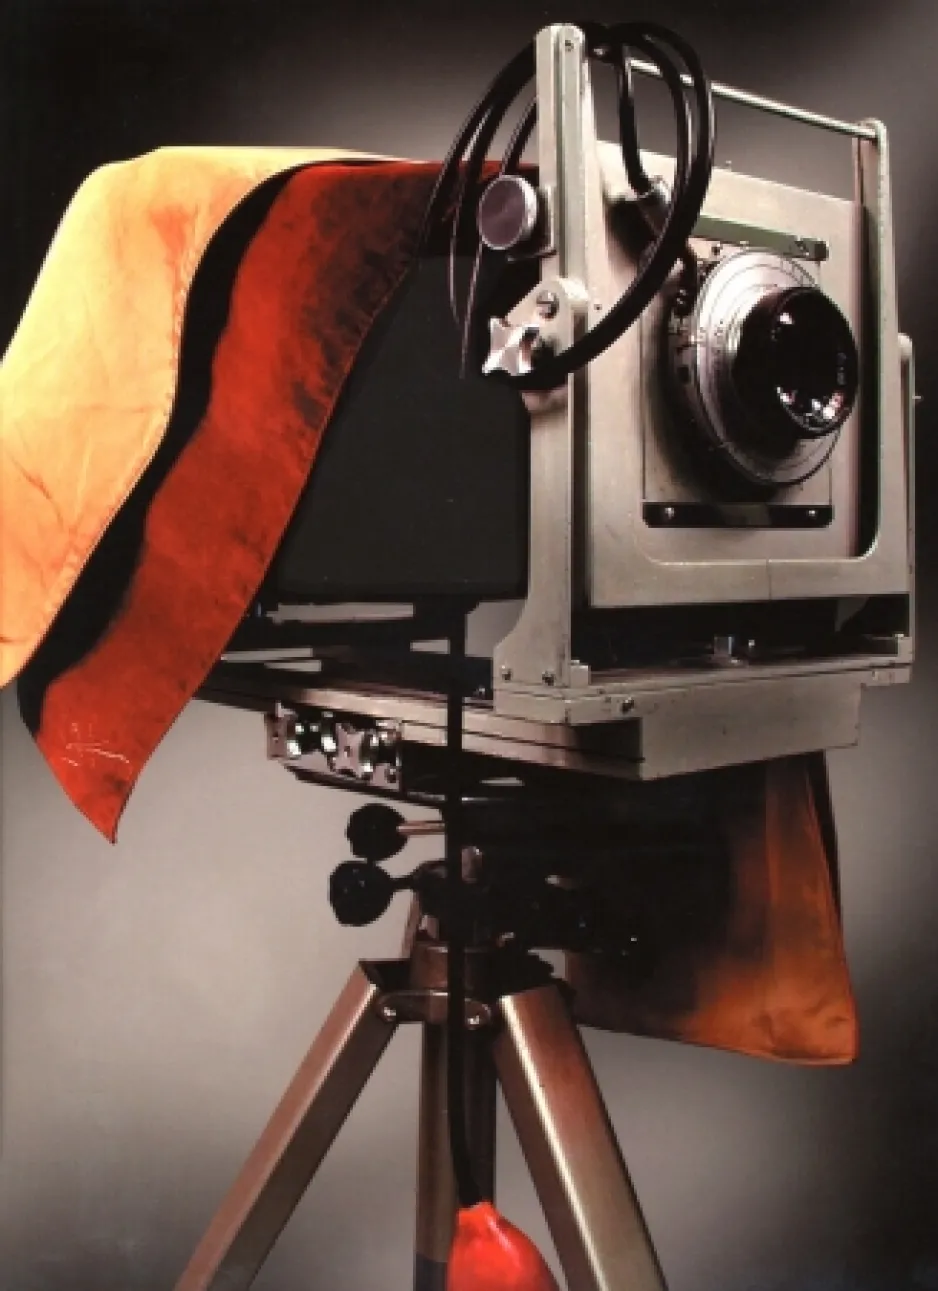 Main camera used by a prominent Canadian photographer Yousuf Karsh.